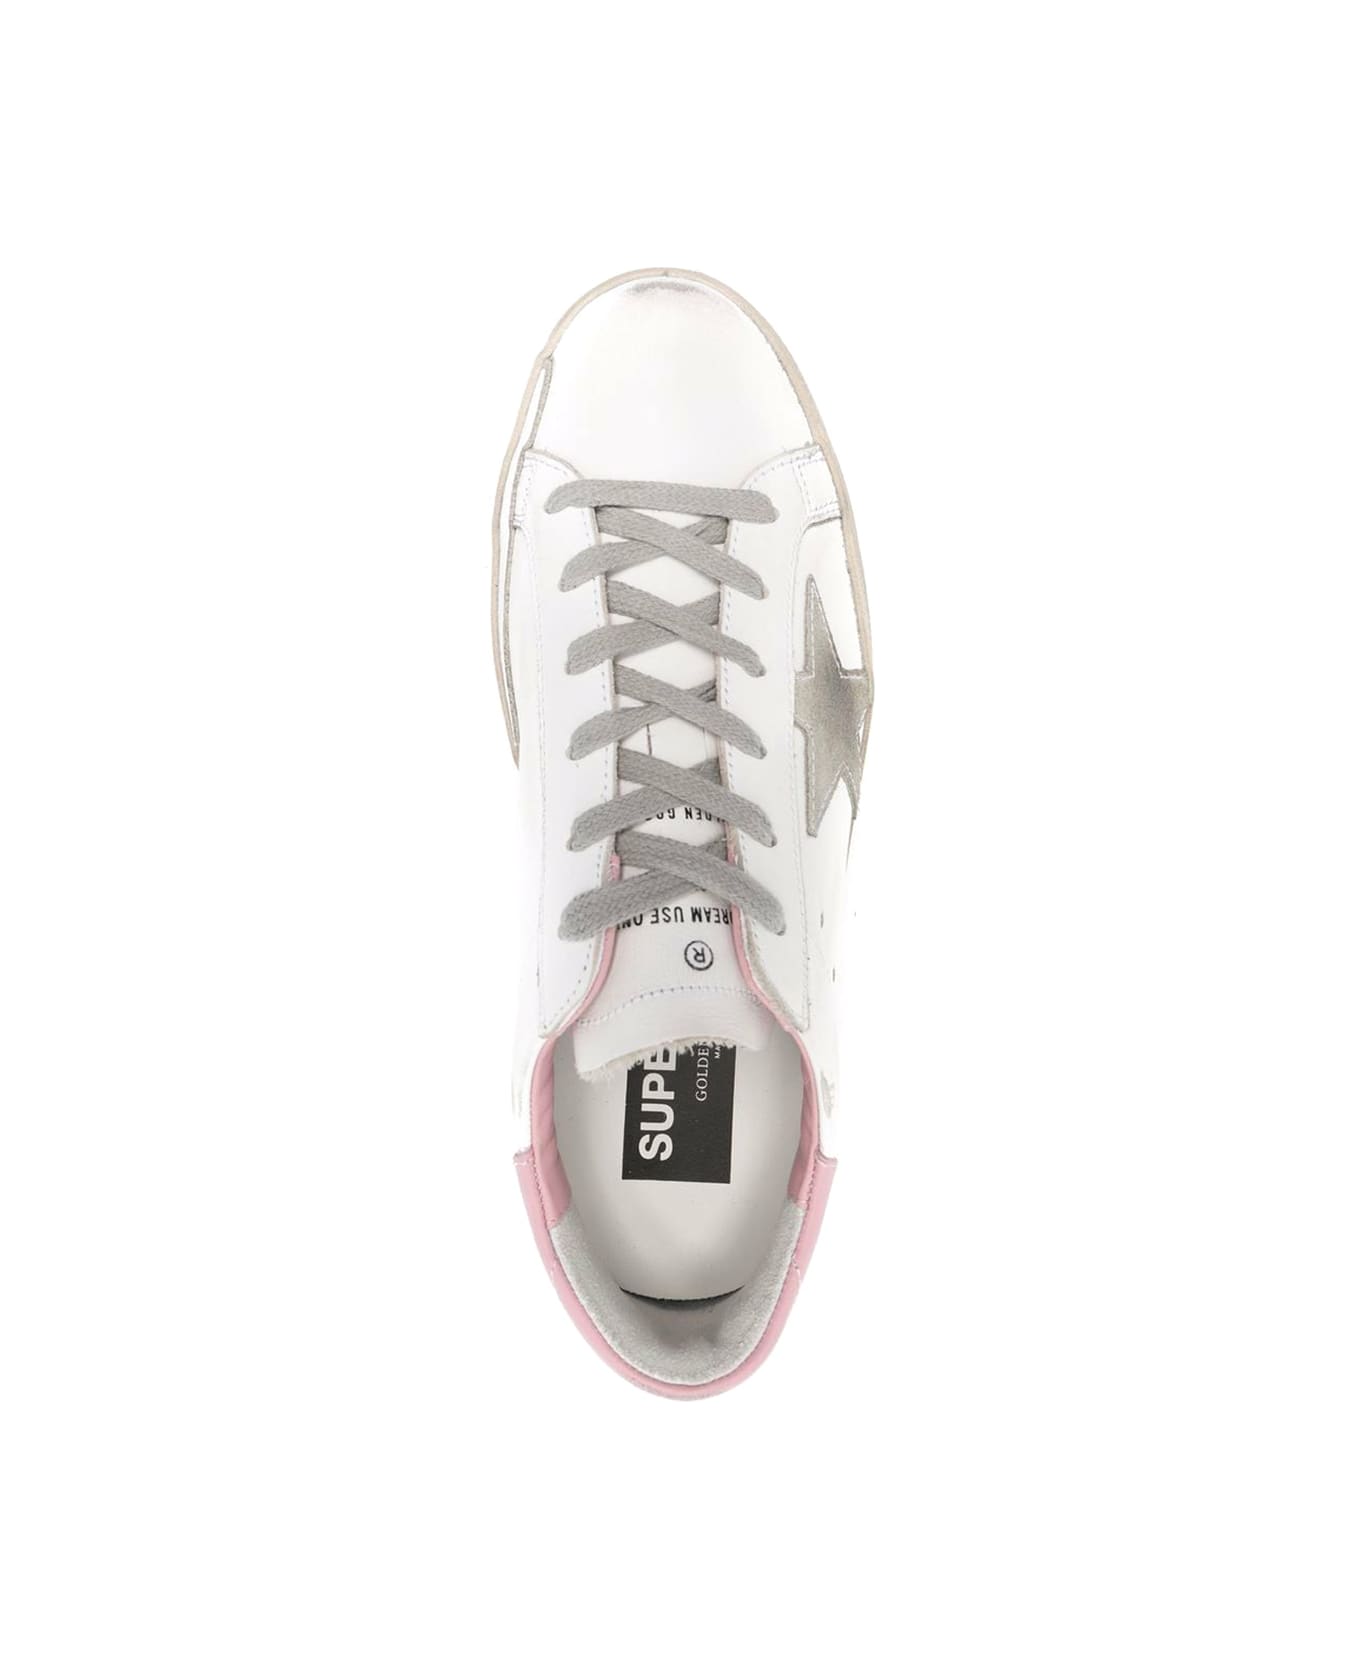 Golden Goose Super-star Leather Upper And Heel Suede Star And Spur Cream Sole - White Ice Light Pink